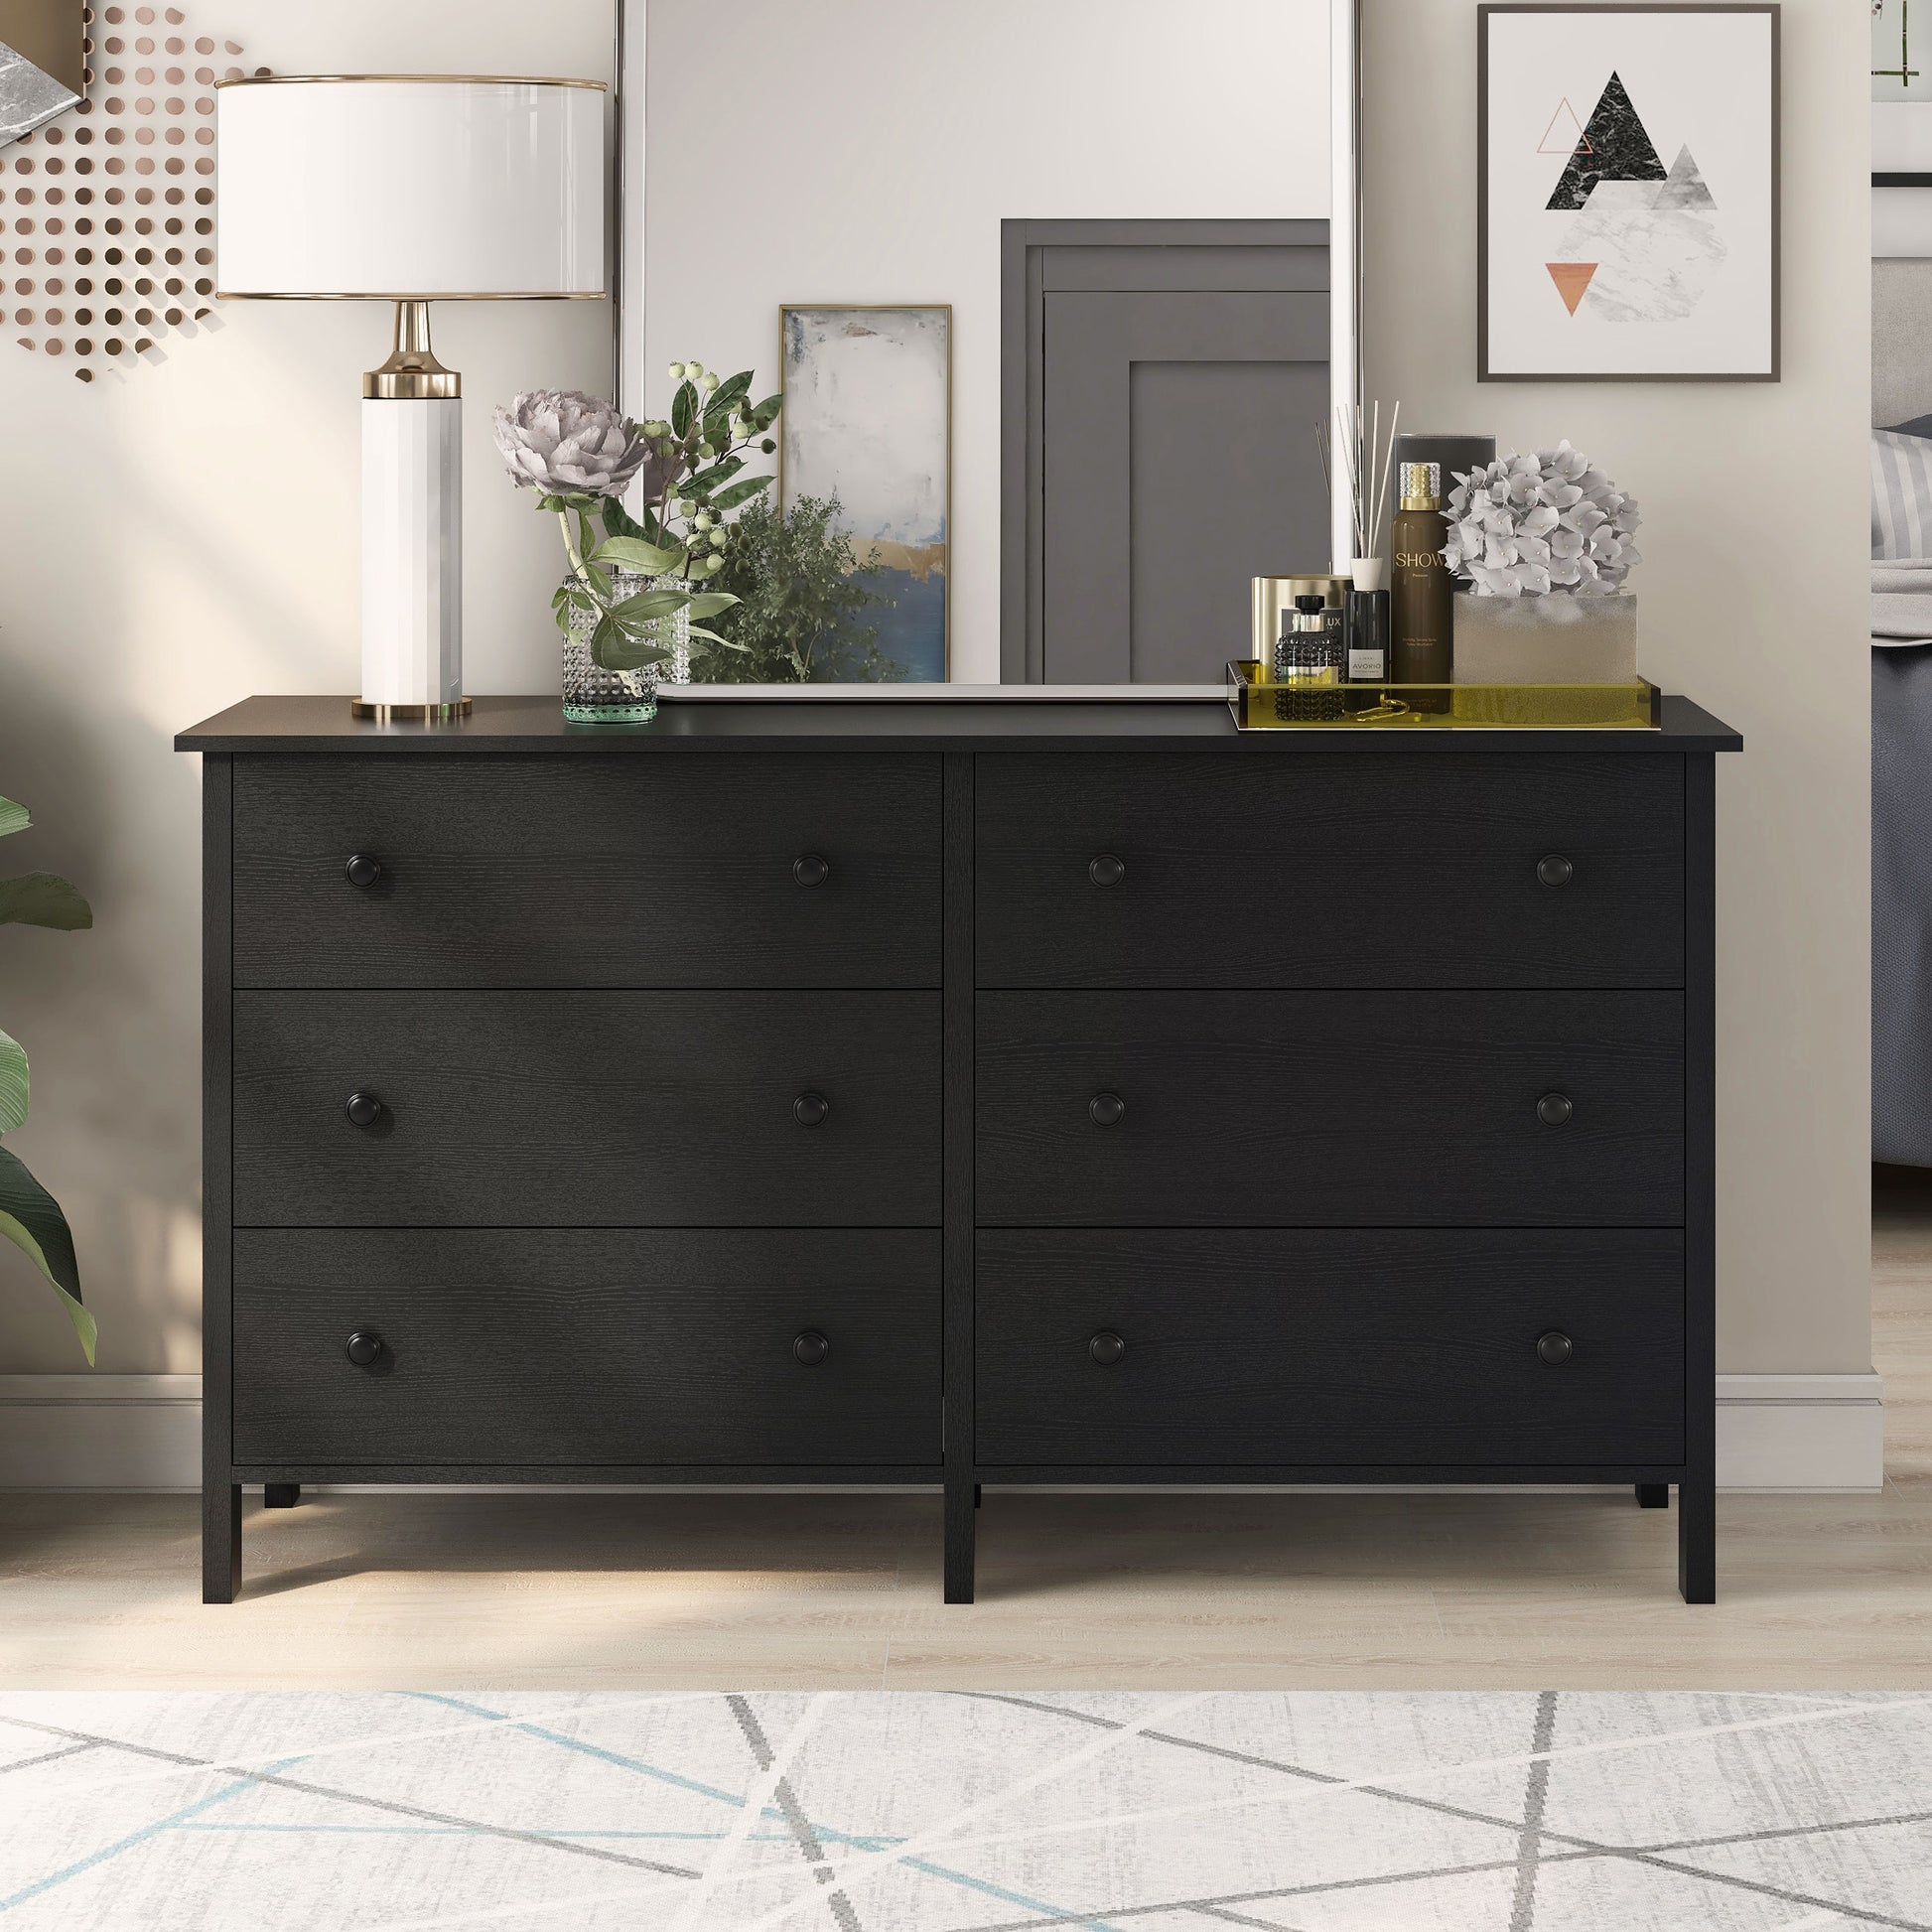 Front-facing transitional black six-drawer youth dresser in a bedroom with accessories